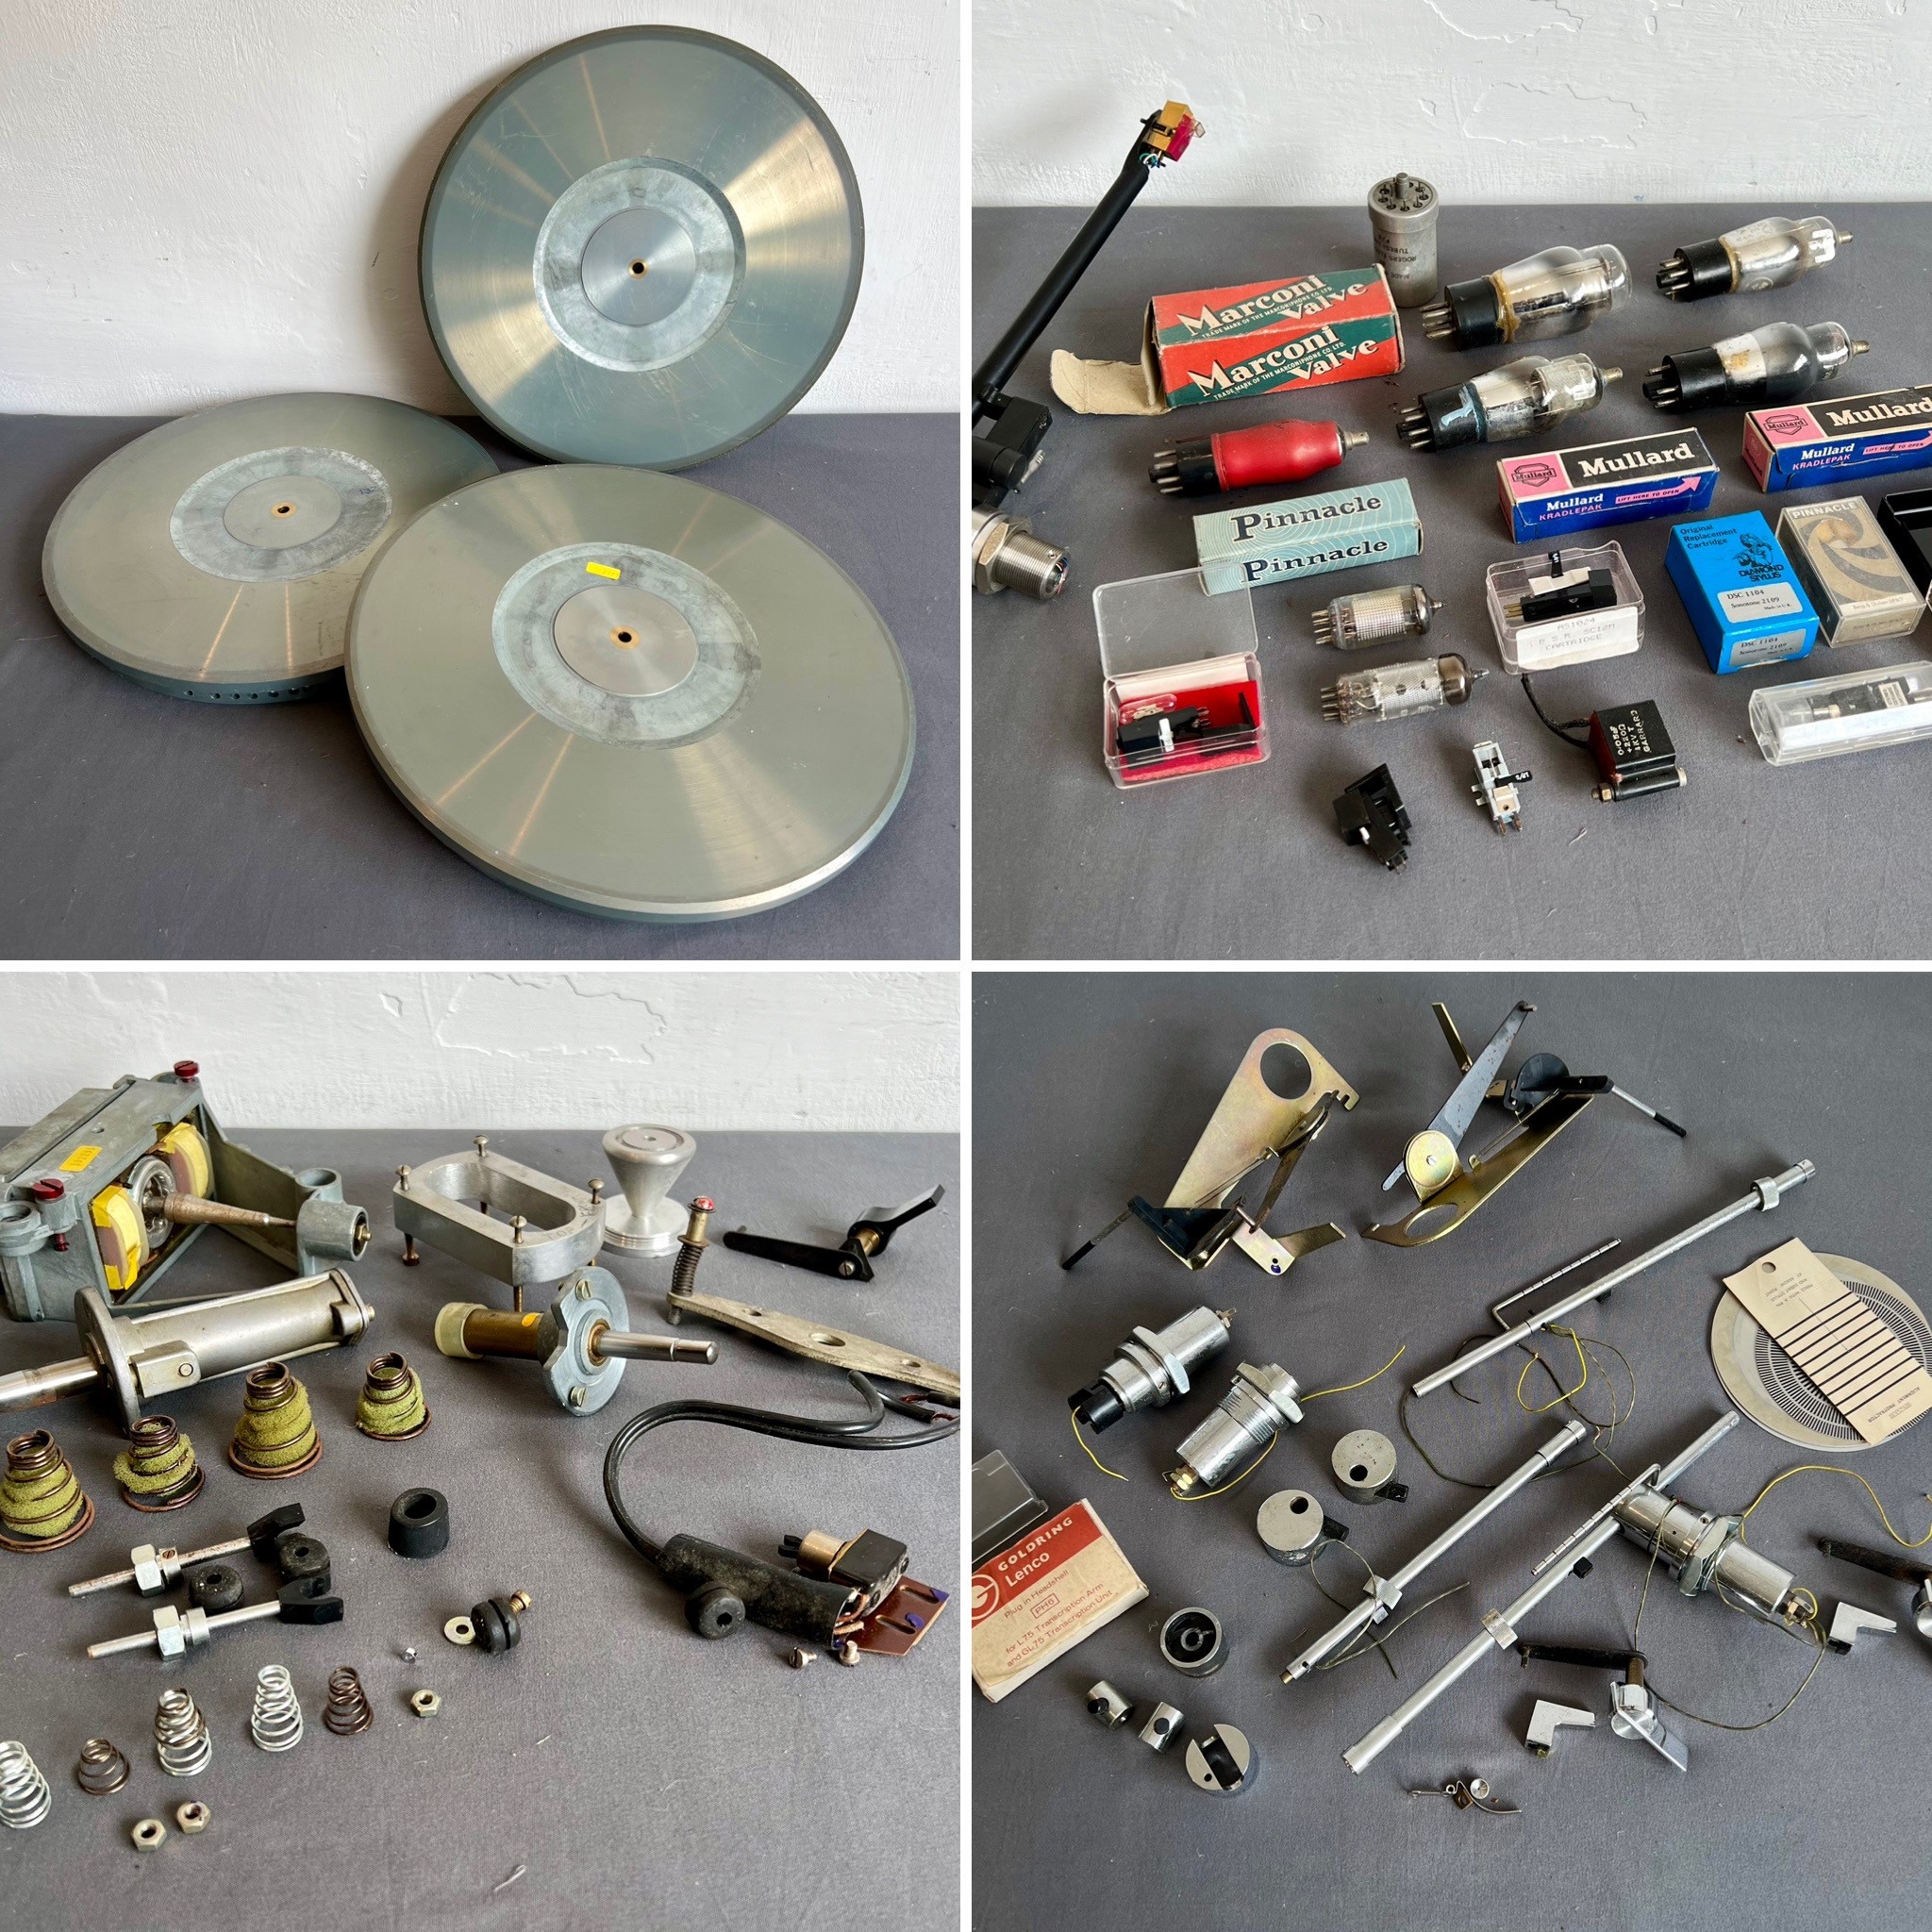 A small collection of vintage turntable parts - including a Michell tonearm with Audio-Technica